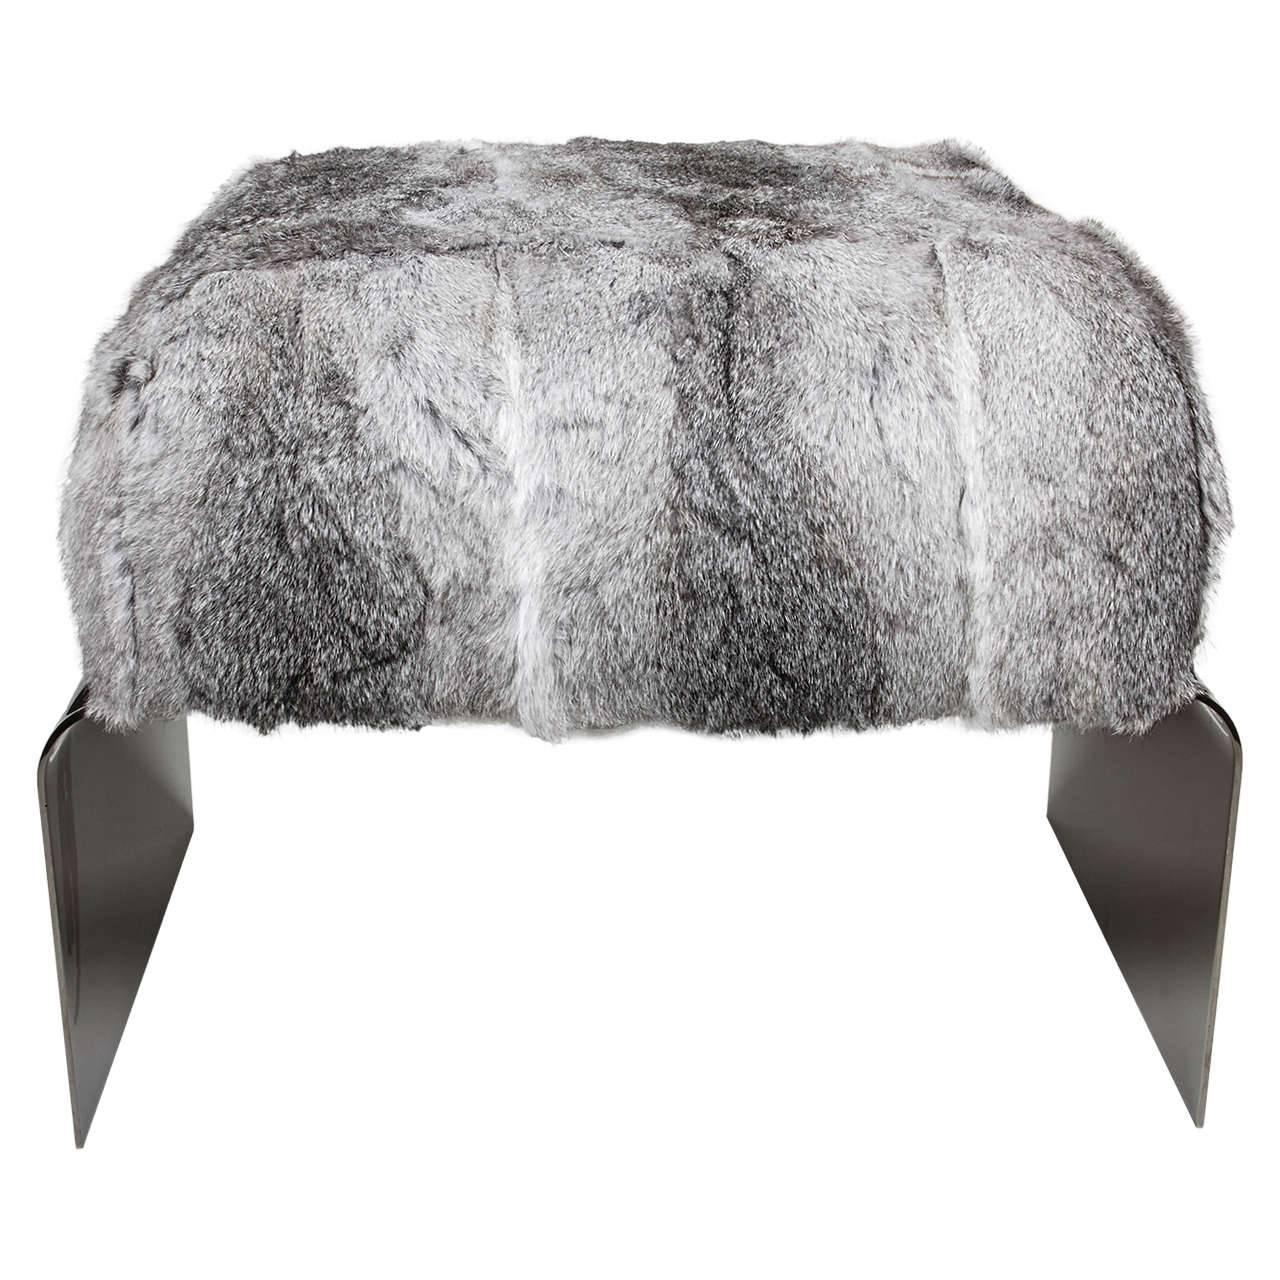 Mid-Century Modern style stool with streamlined waterfall base design in polished black nickel. The bench is upholstered in luxurious rabbit fur in variant hues of grey. Great accent piece for any room and also great as an ottoman.